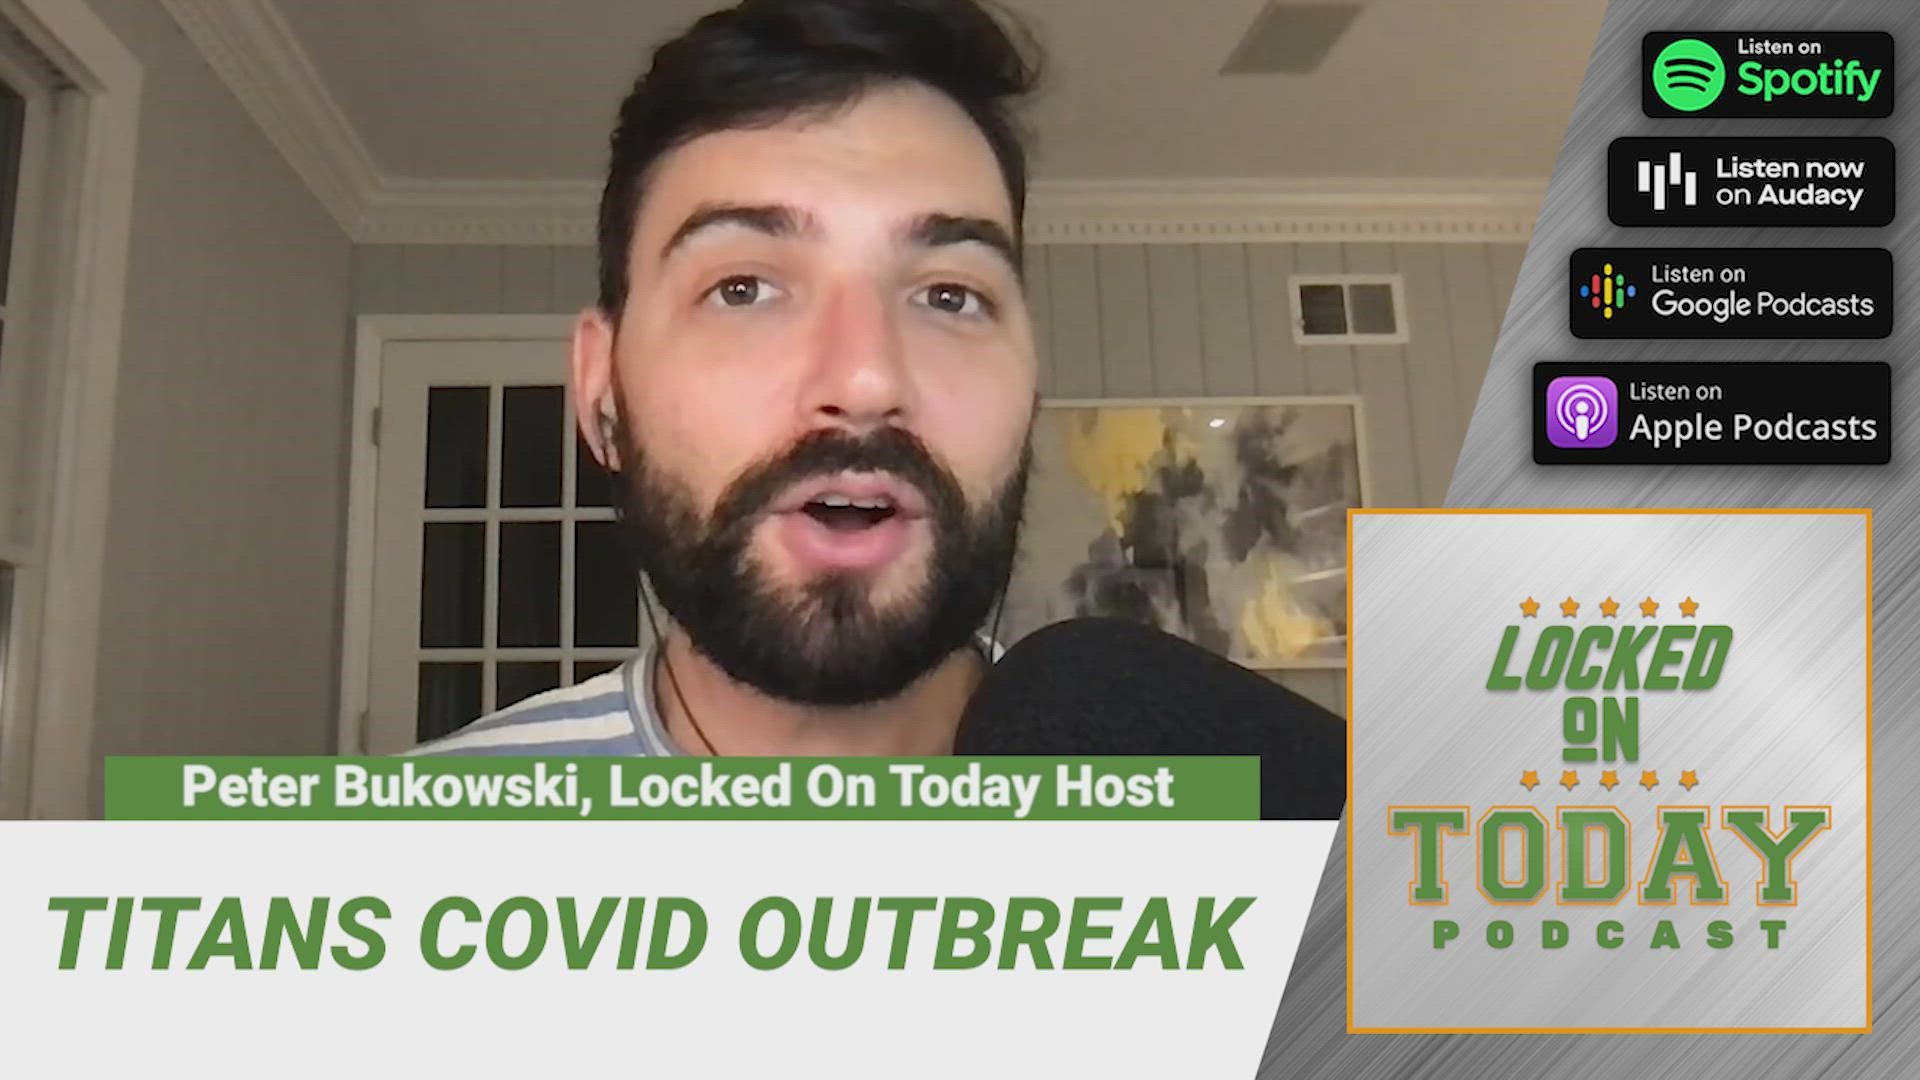 The Titans had the first big COVID-19 outbreak during the season last year and now they have the biggest outbreak of the preseason as nine players are on COVID list.